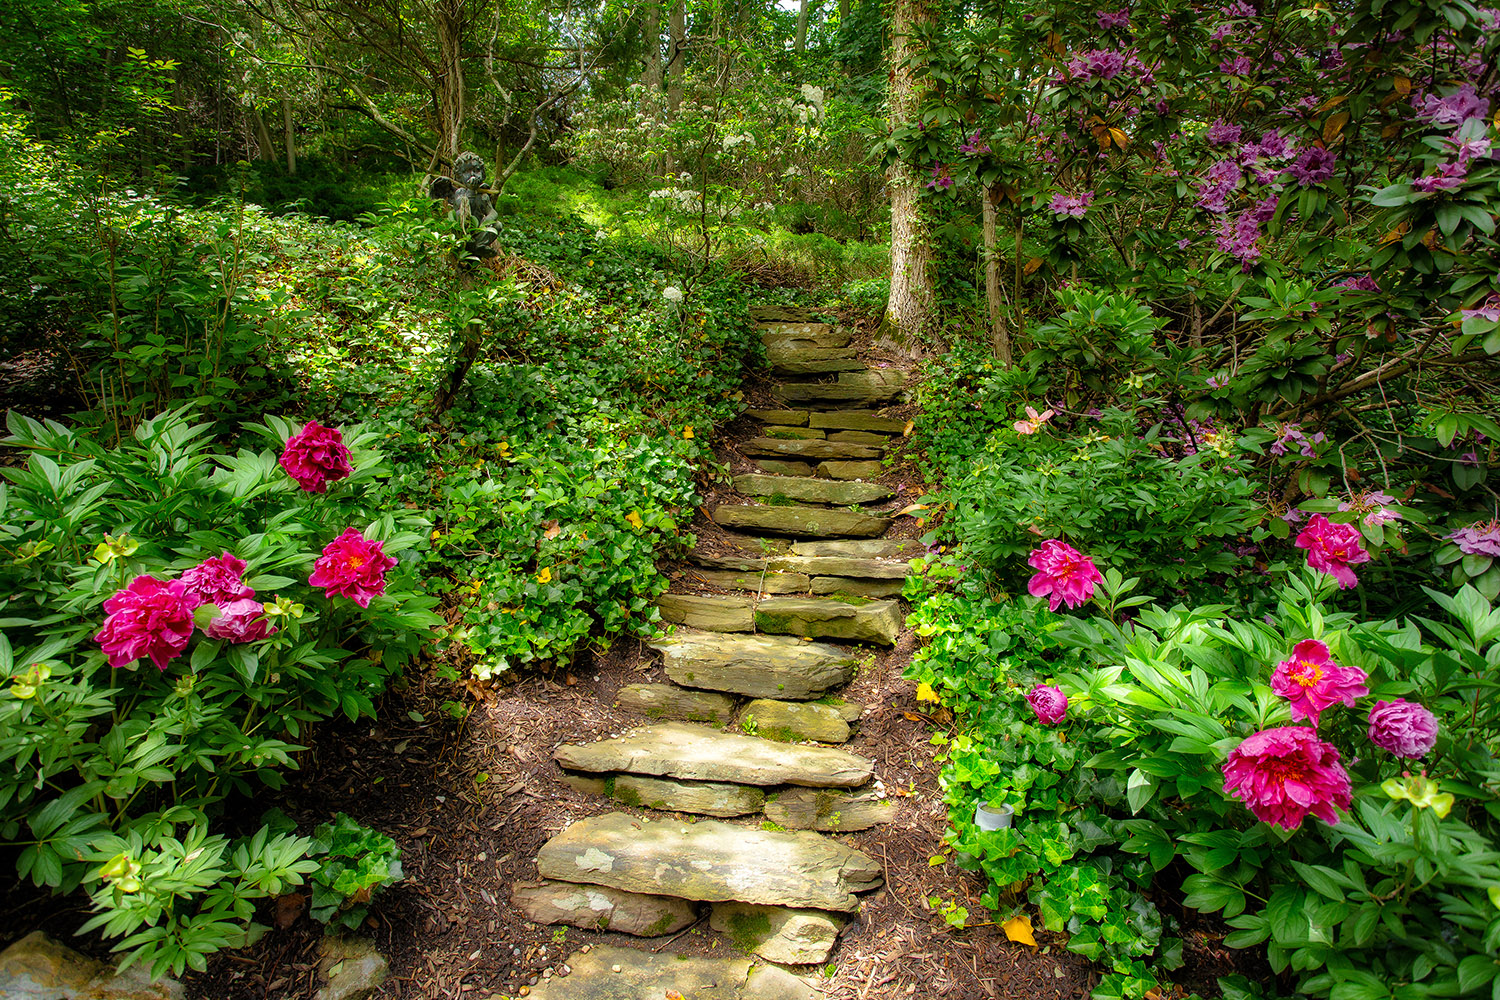 Stepping Stones roses along a path